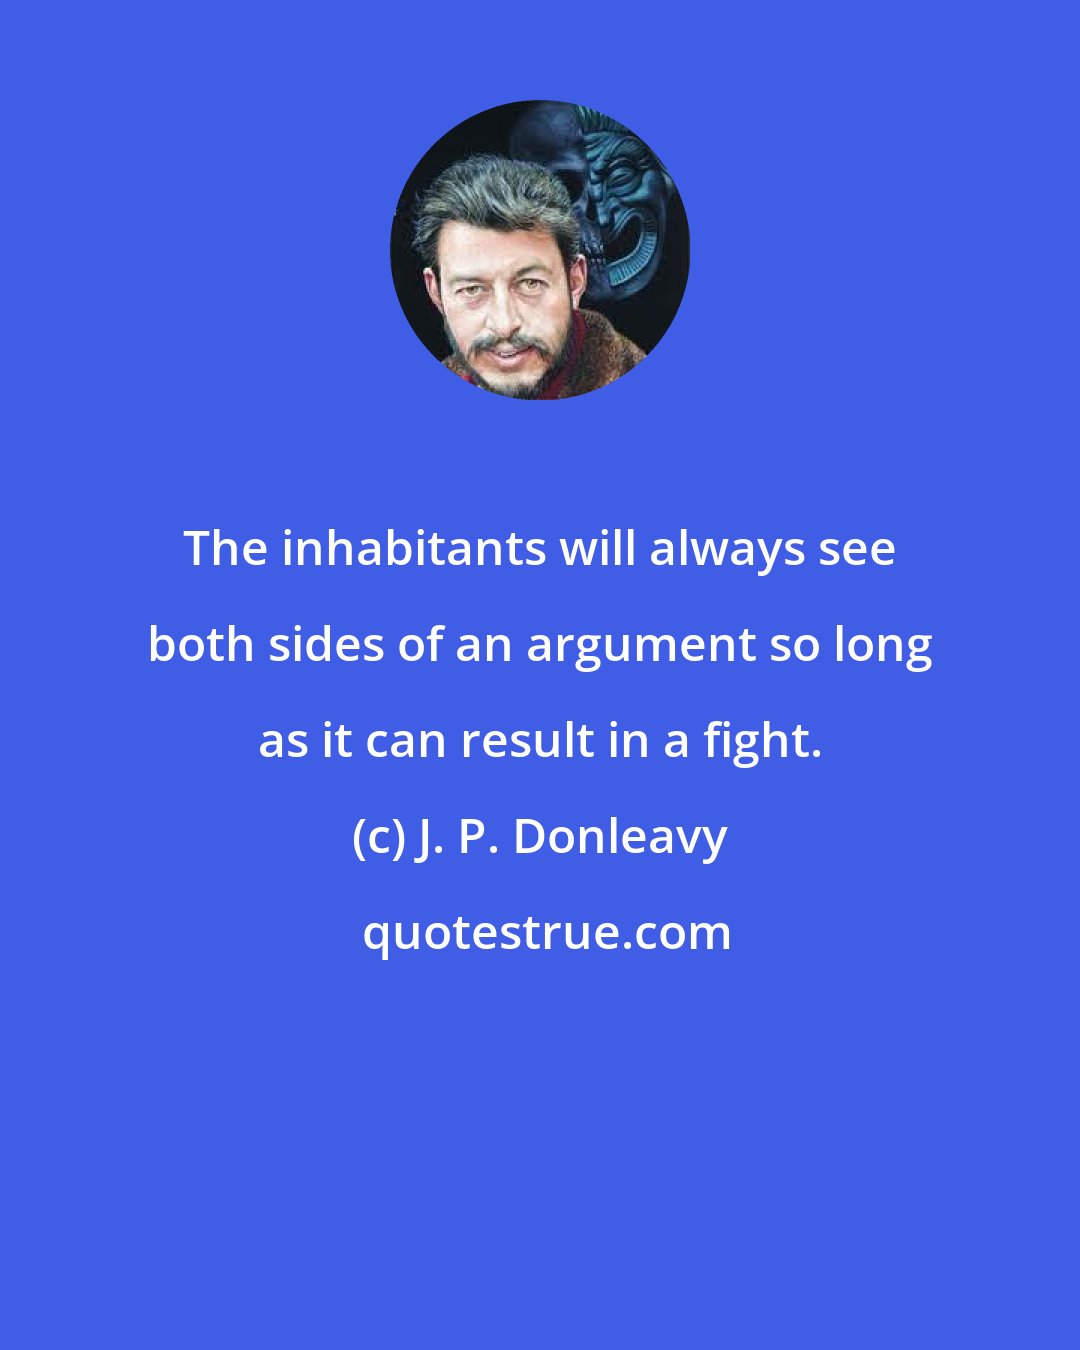 J. P. Donleavy: The inhabitants will always see both sides of an argument so long as it can result in a fight.